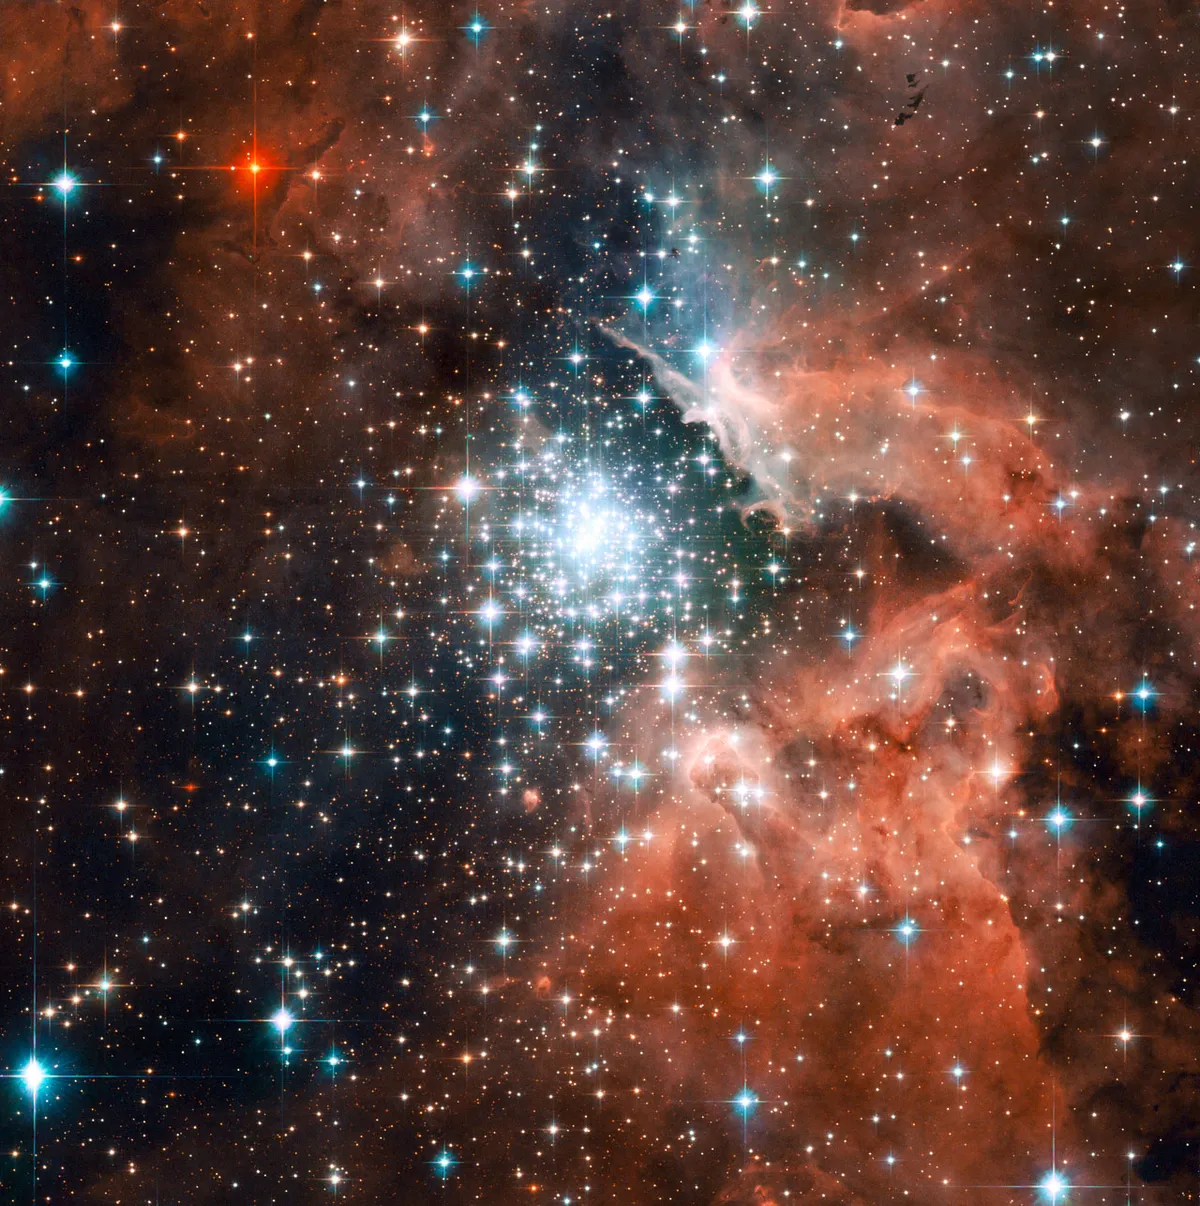 The star-forming region of NGC 3603. Situated in the Milky Way, this is one of the most impressive massive young star clusters in the Galaxy